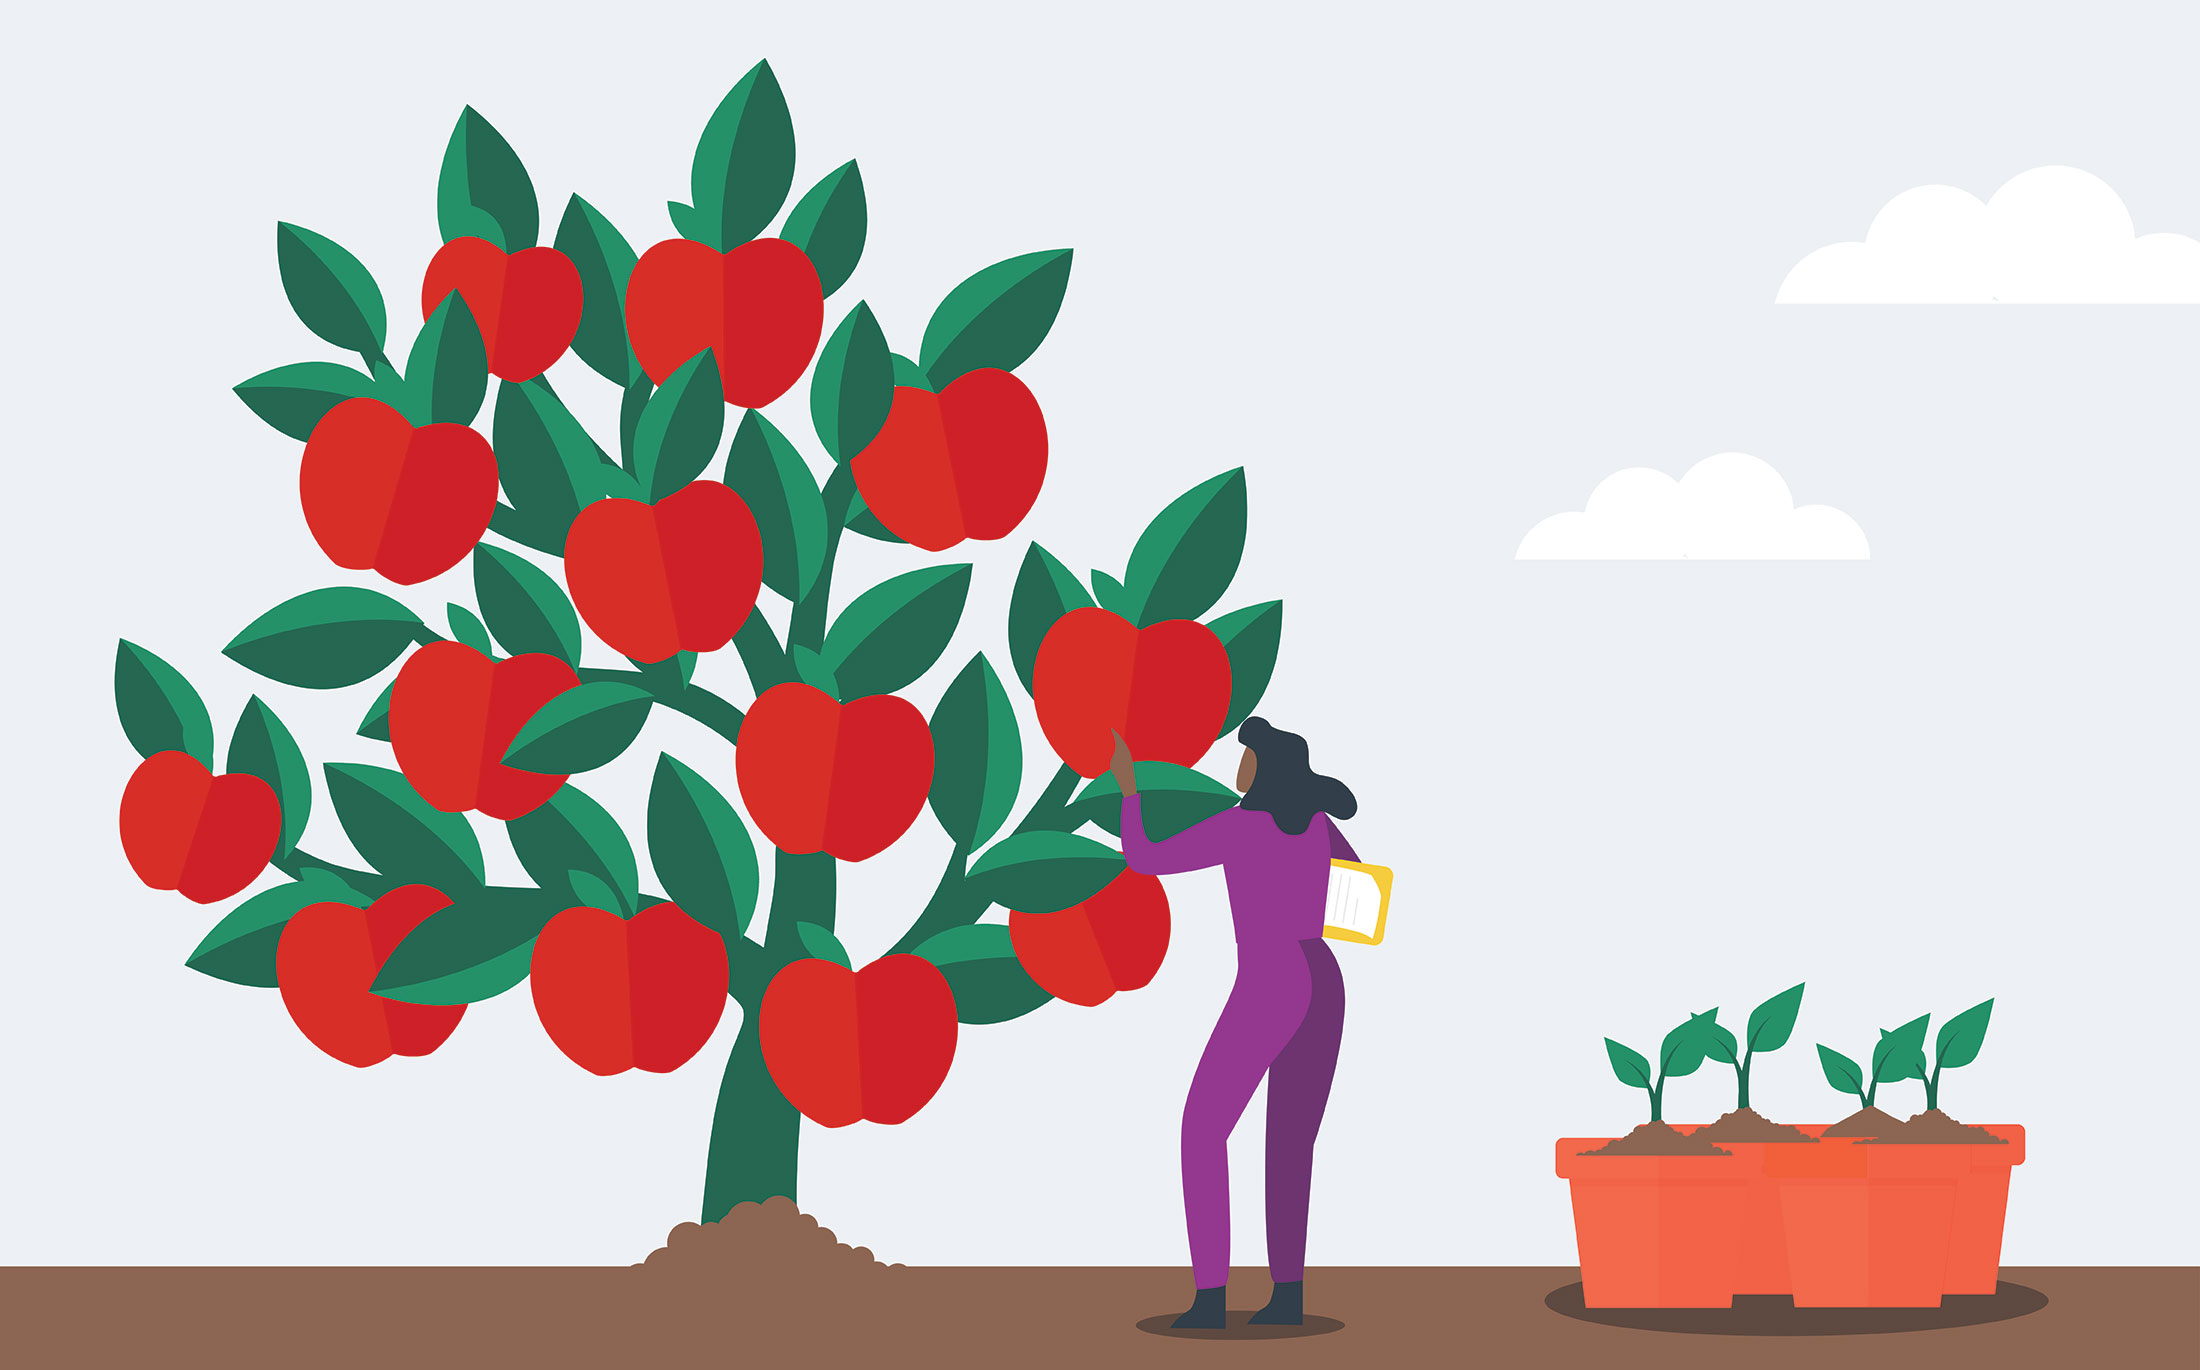 illustration of a person picking apples from a tree